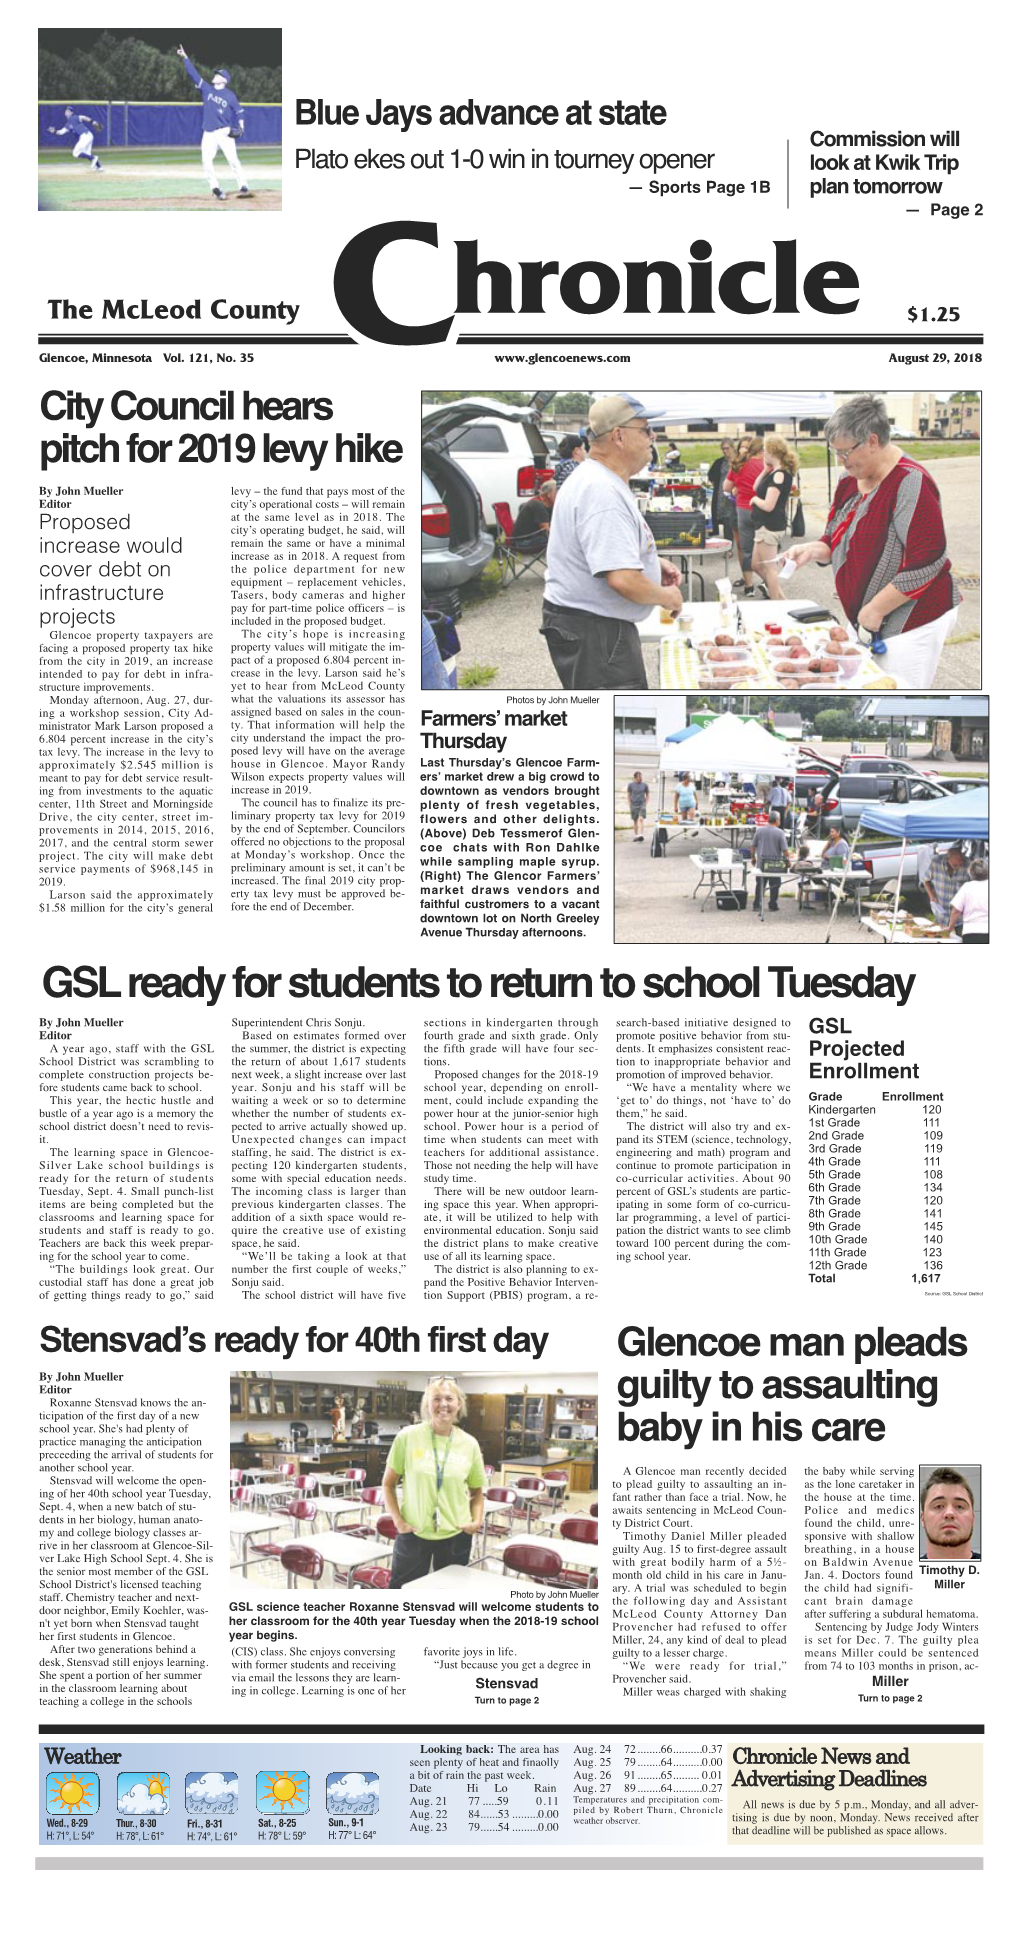 GSL Ready for Students to Return to School Tuesday by John Mueller Superintendent Chris Sonju